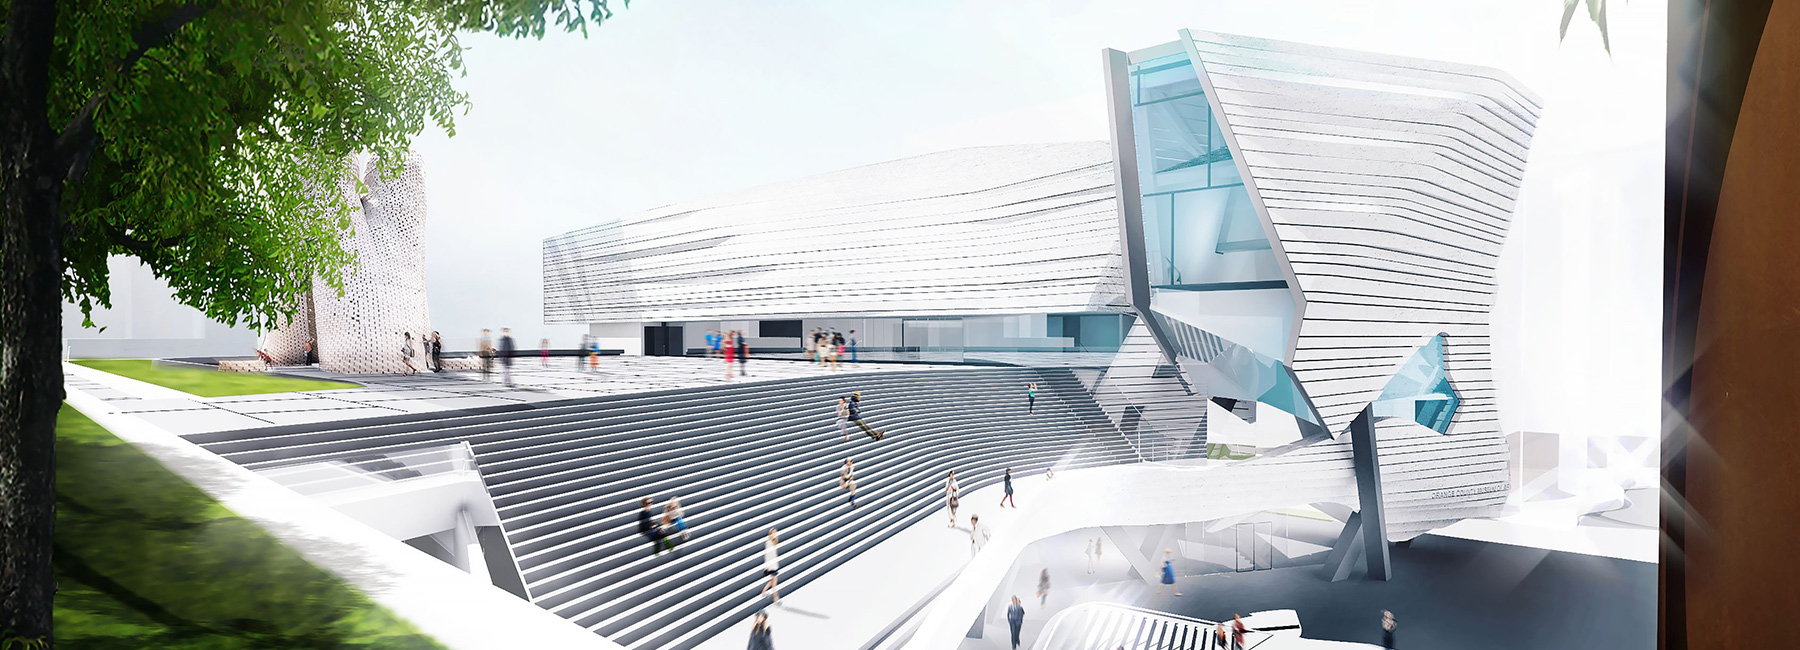 morphosis unveils 'flexible and functional' design for new orange county museum of art